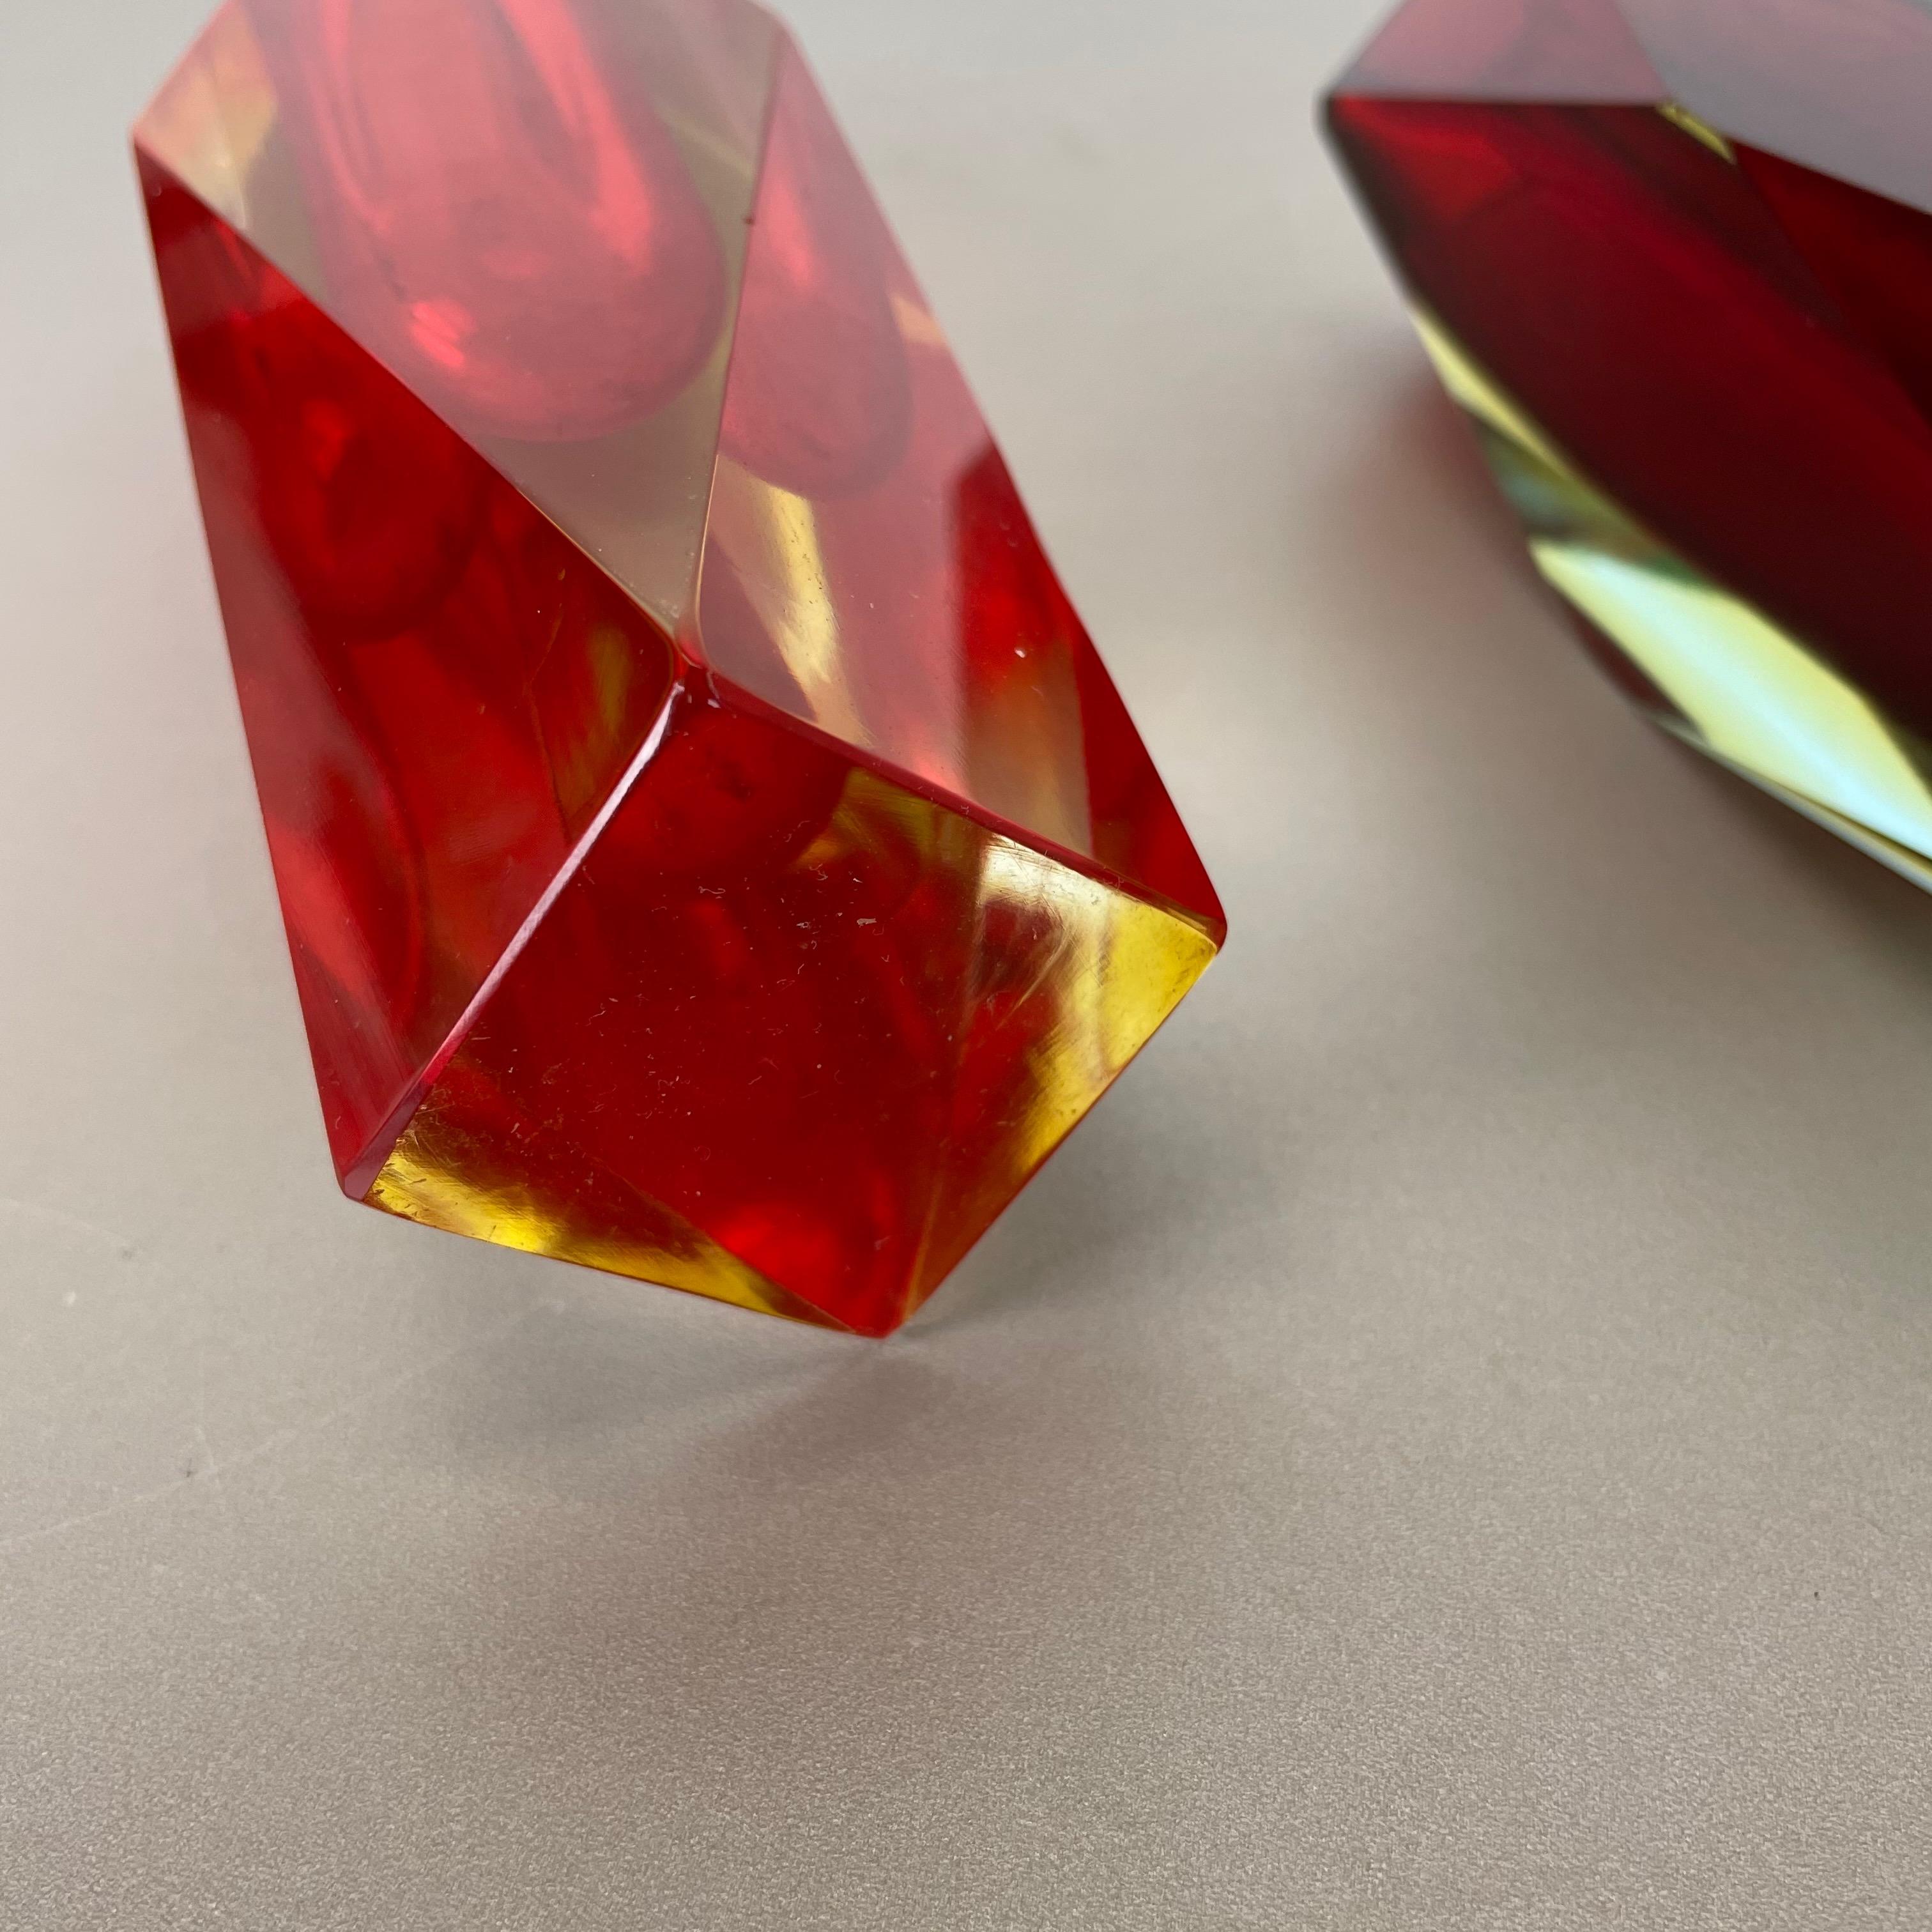 Set of 2 Faceted Murano Glass Sommerso Vase Designed by Flavio Poli Italy, 1970s For Sale 11